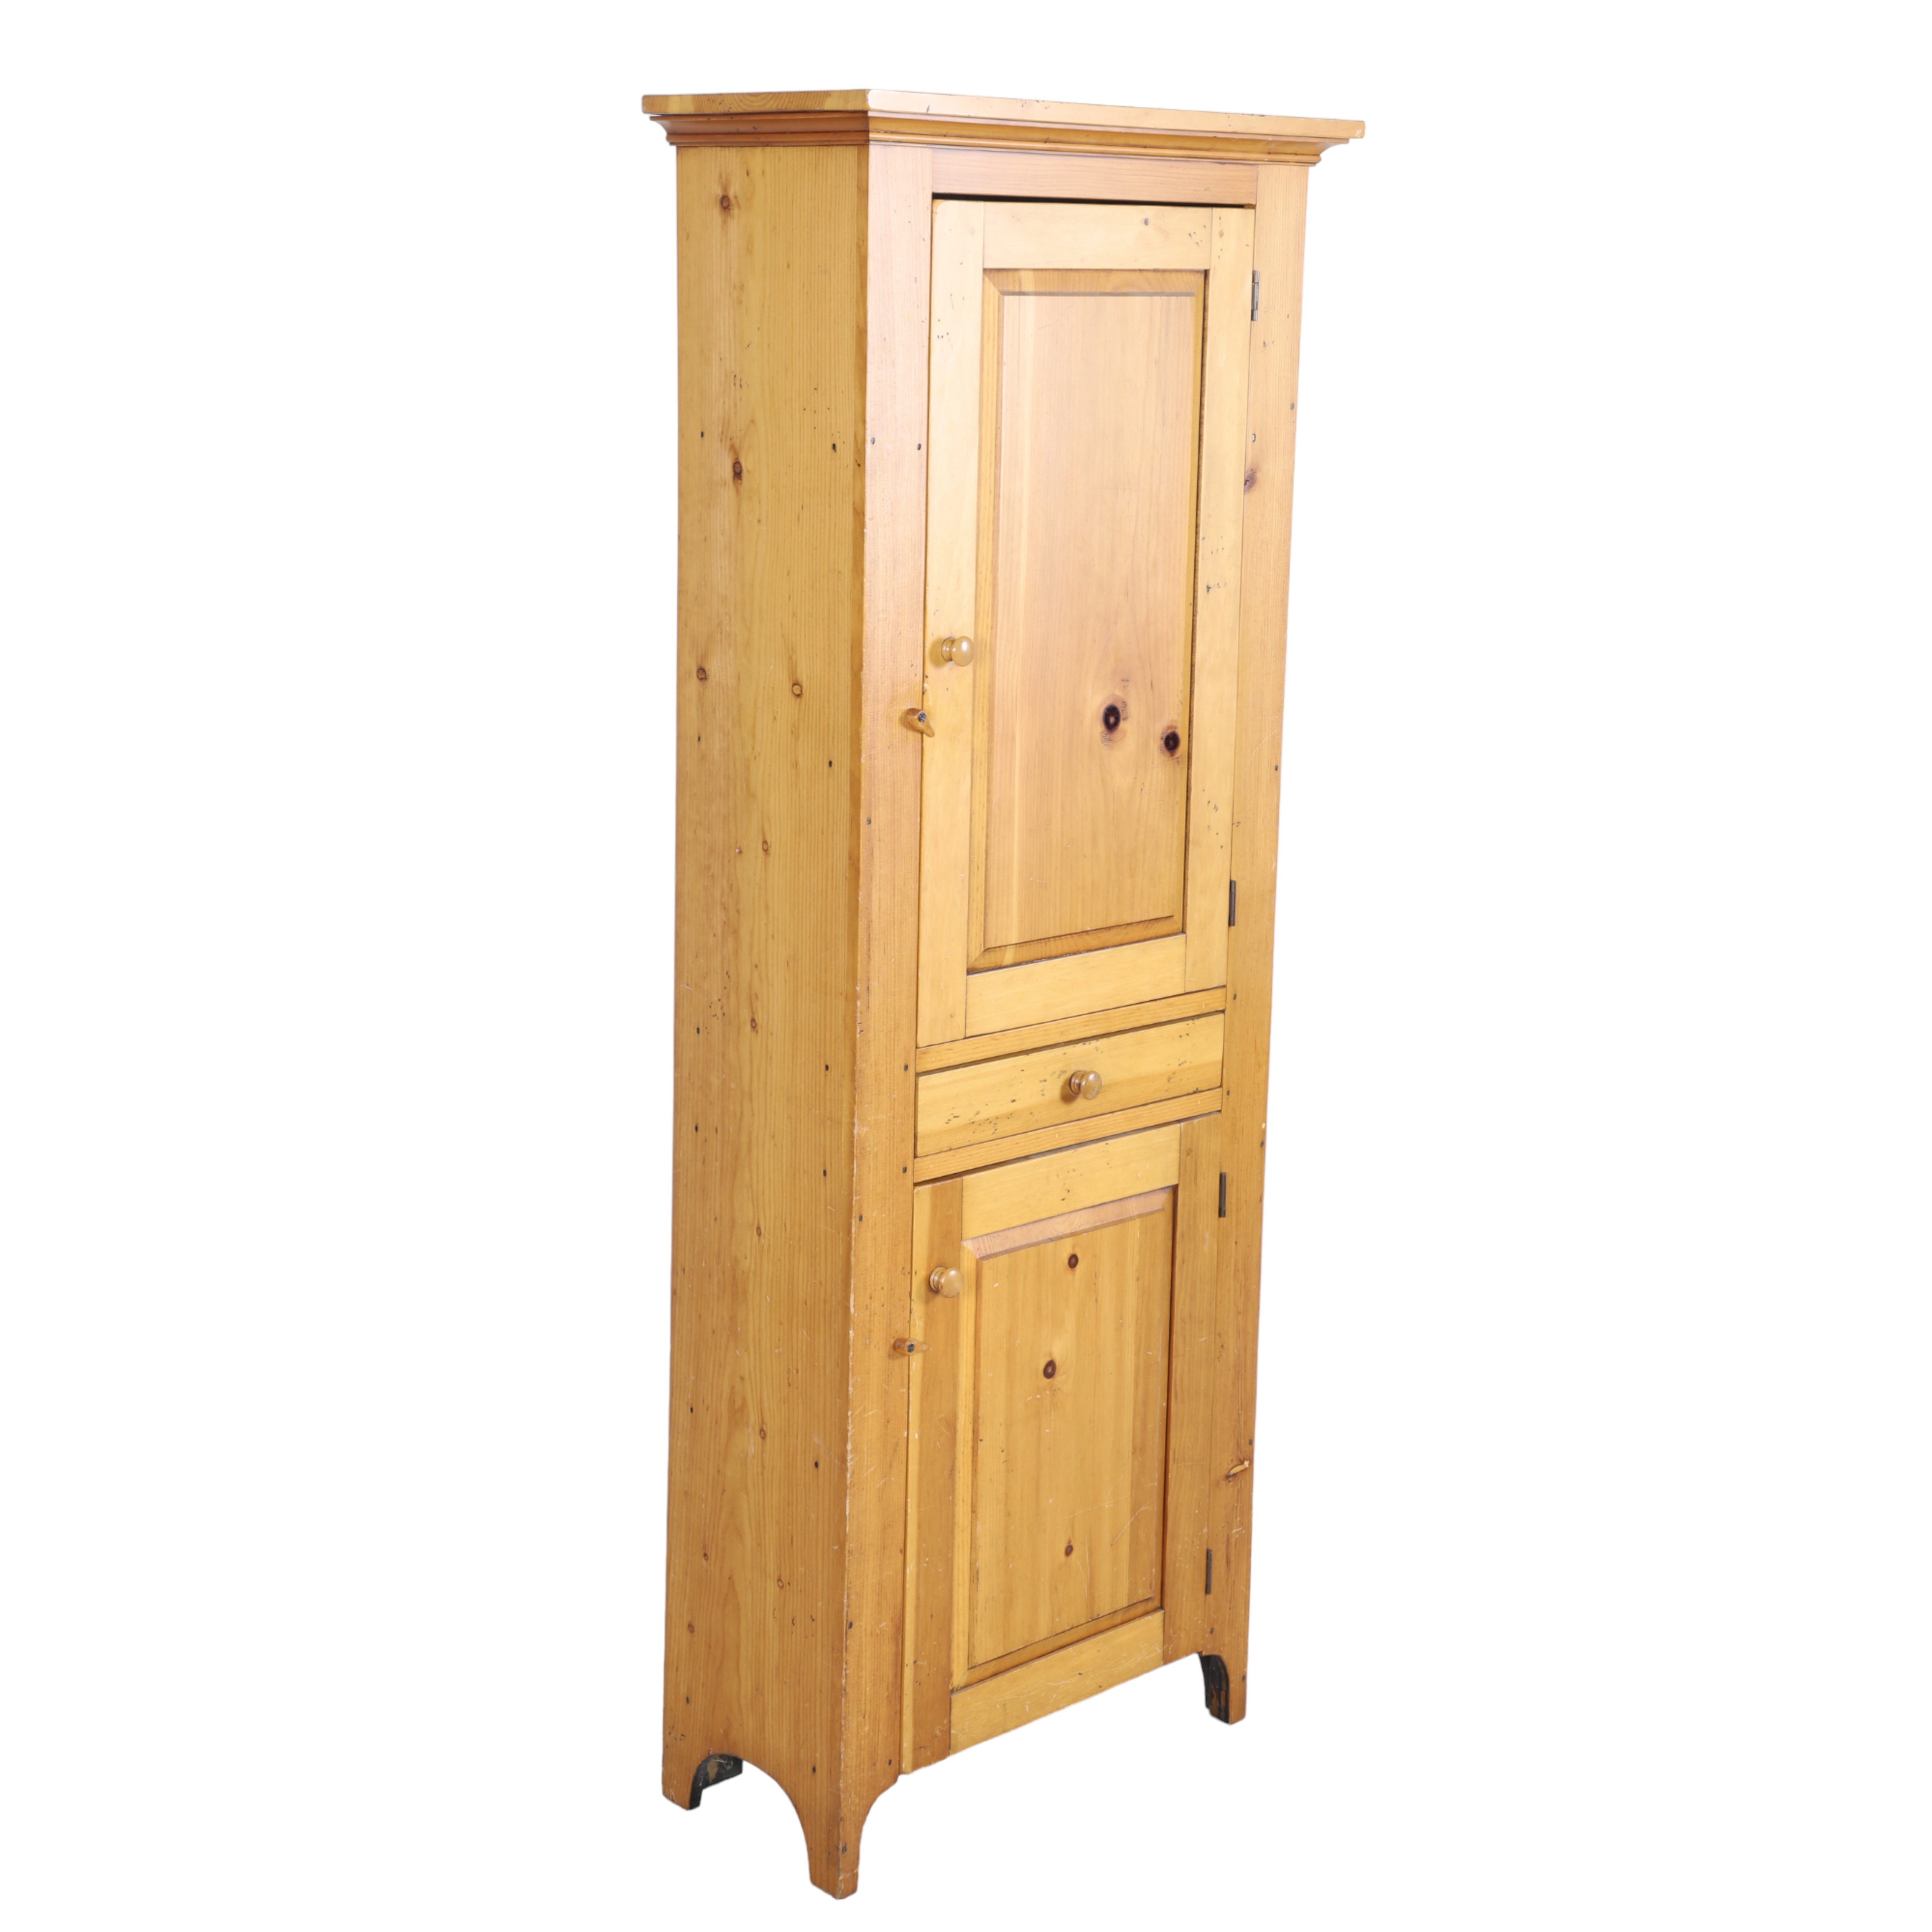 Pine paneled cupboard, top with